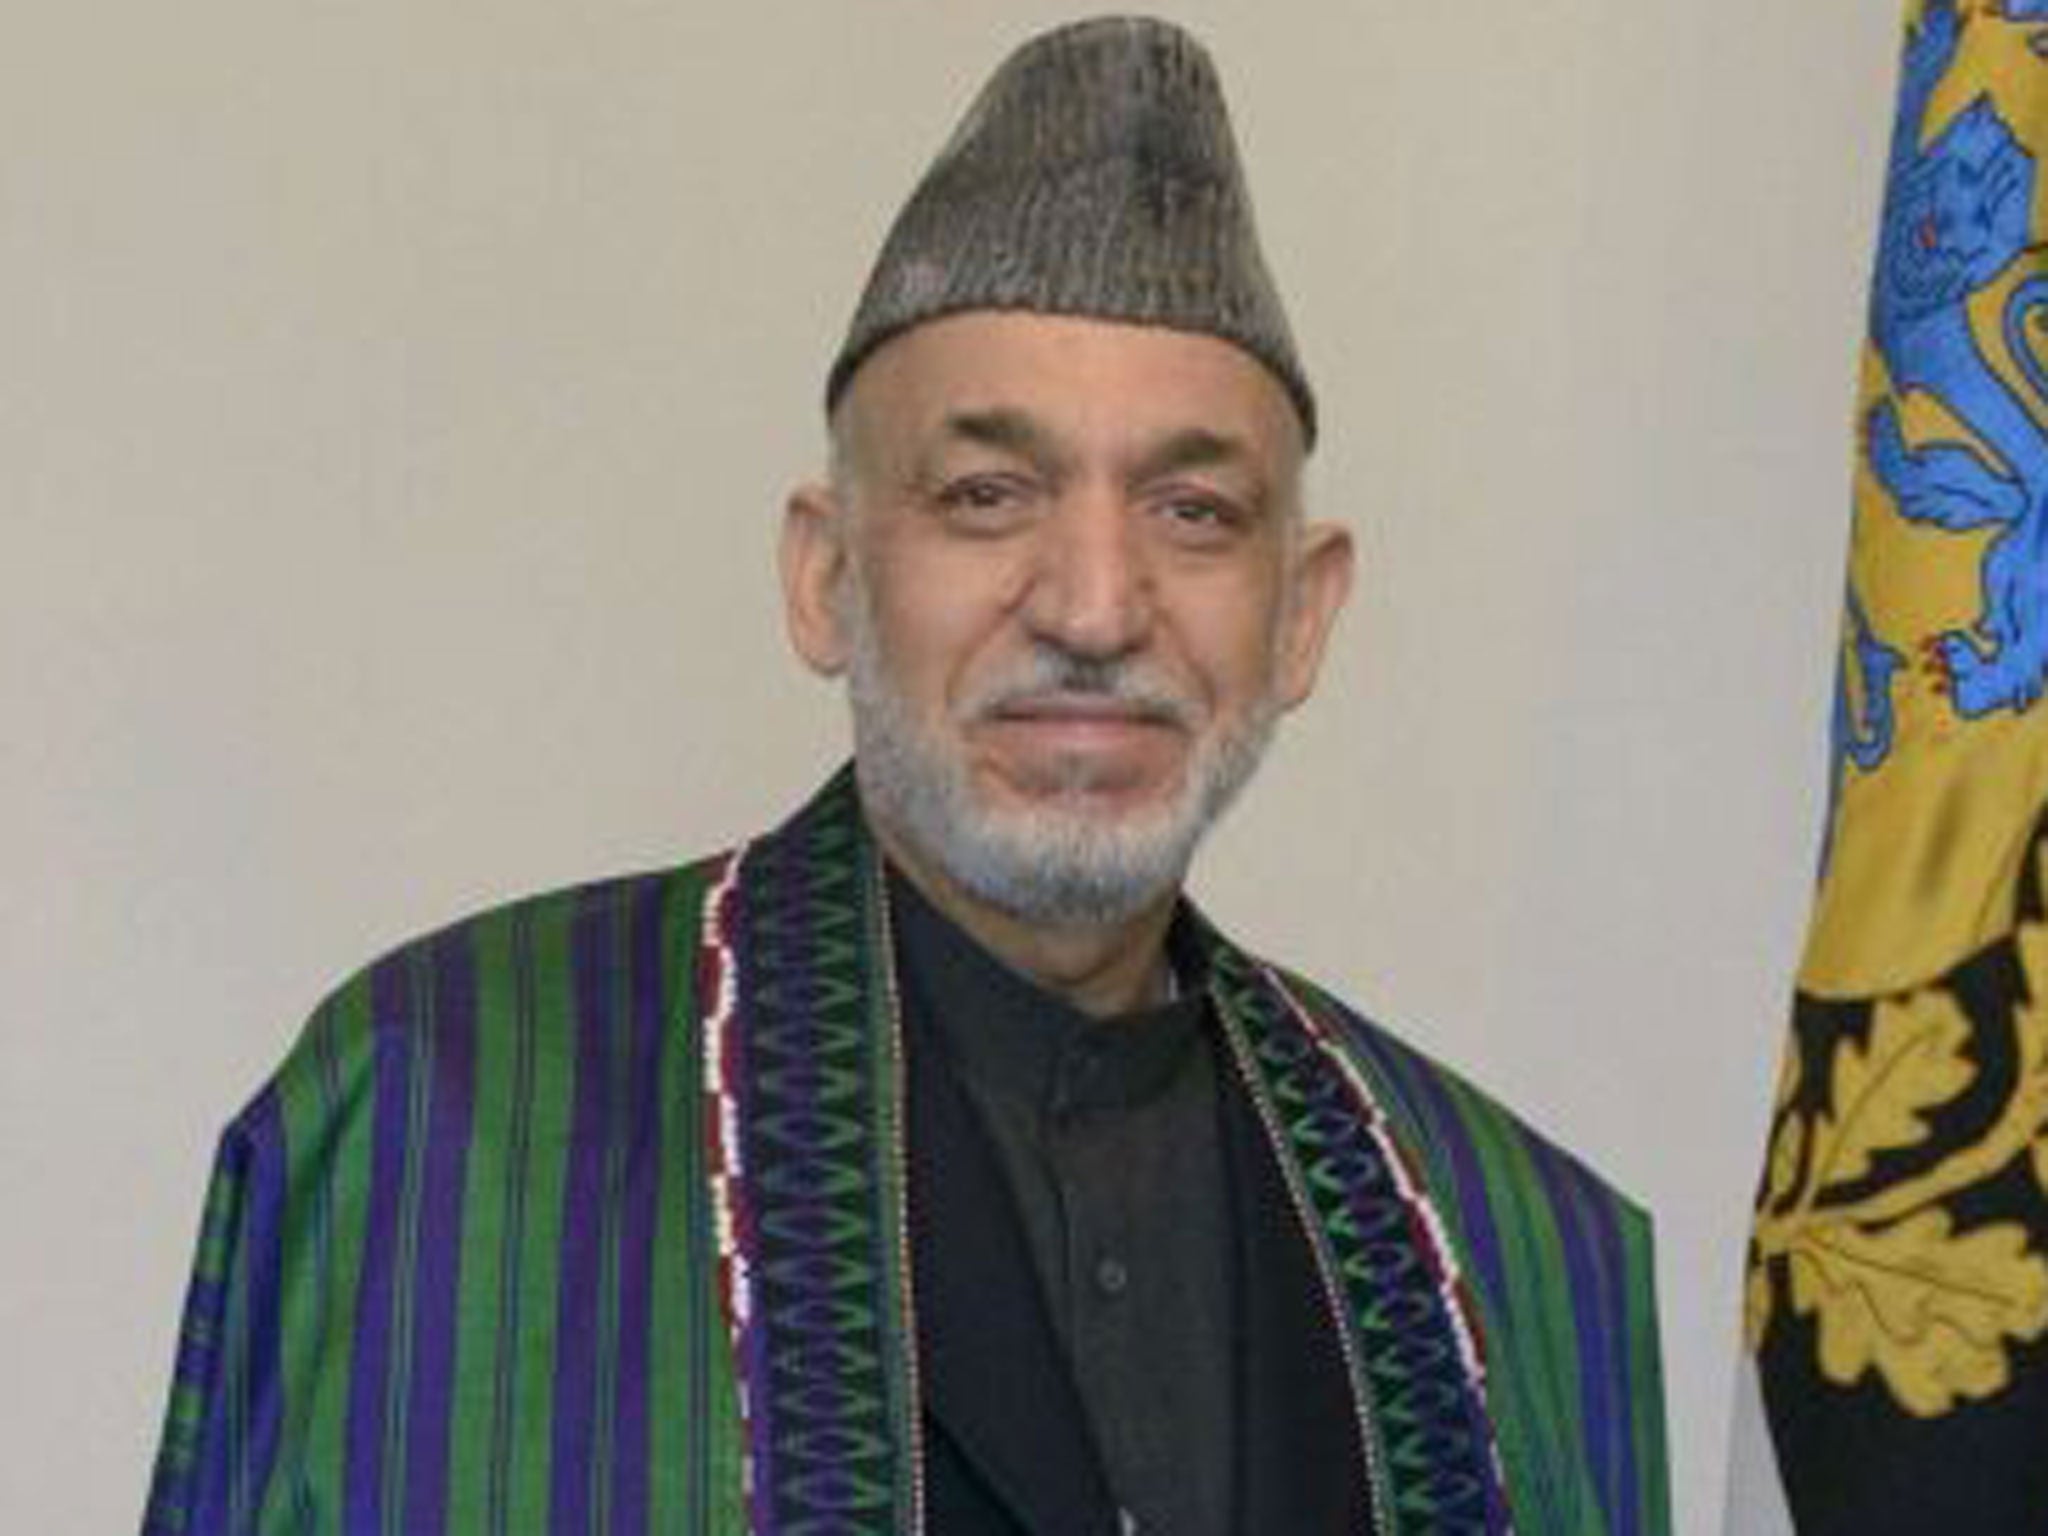 Hamid Karzai has pressed for the closure of the Guantanamo Bay prison